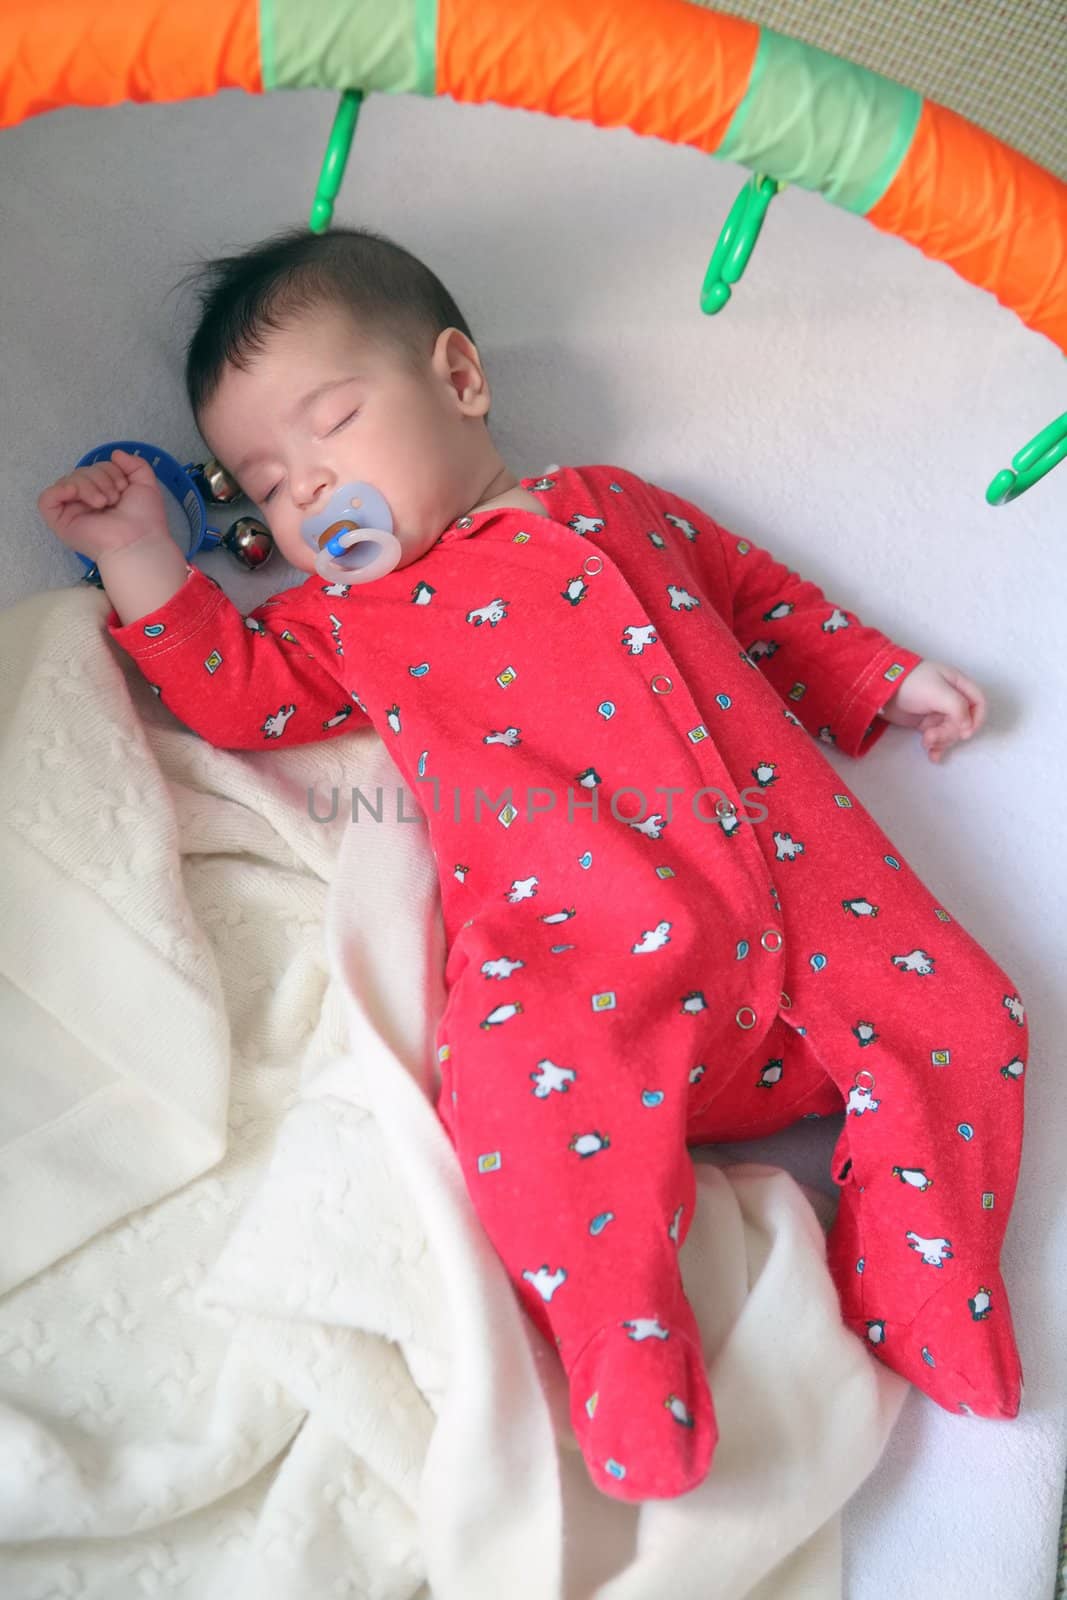 infant in red cloth sweetly sleeps